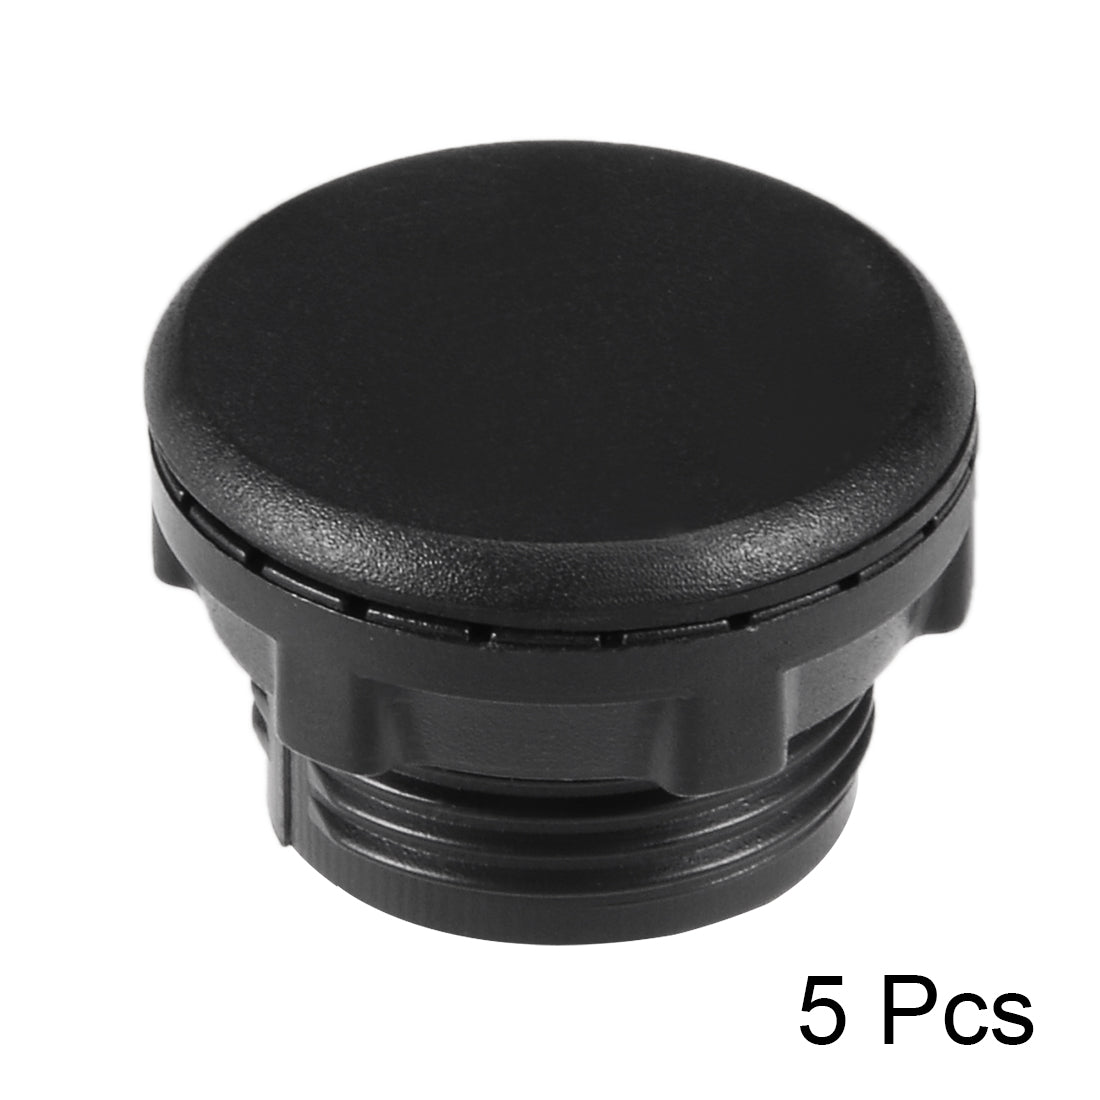 uxcell Uxcell 5 Pcs 22mm Black Plastic Push Button Switch Hole Panel Plug